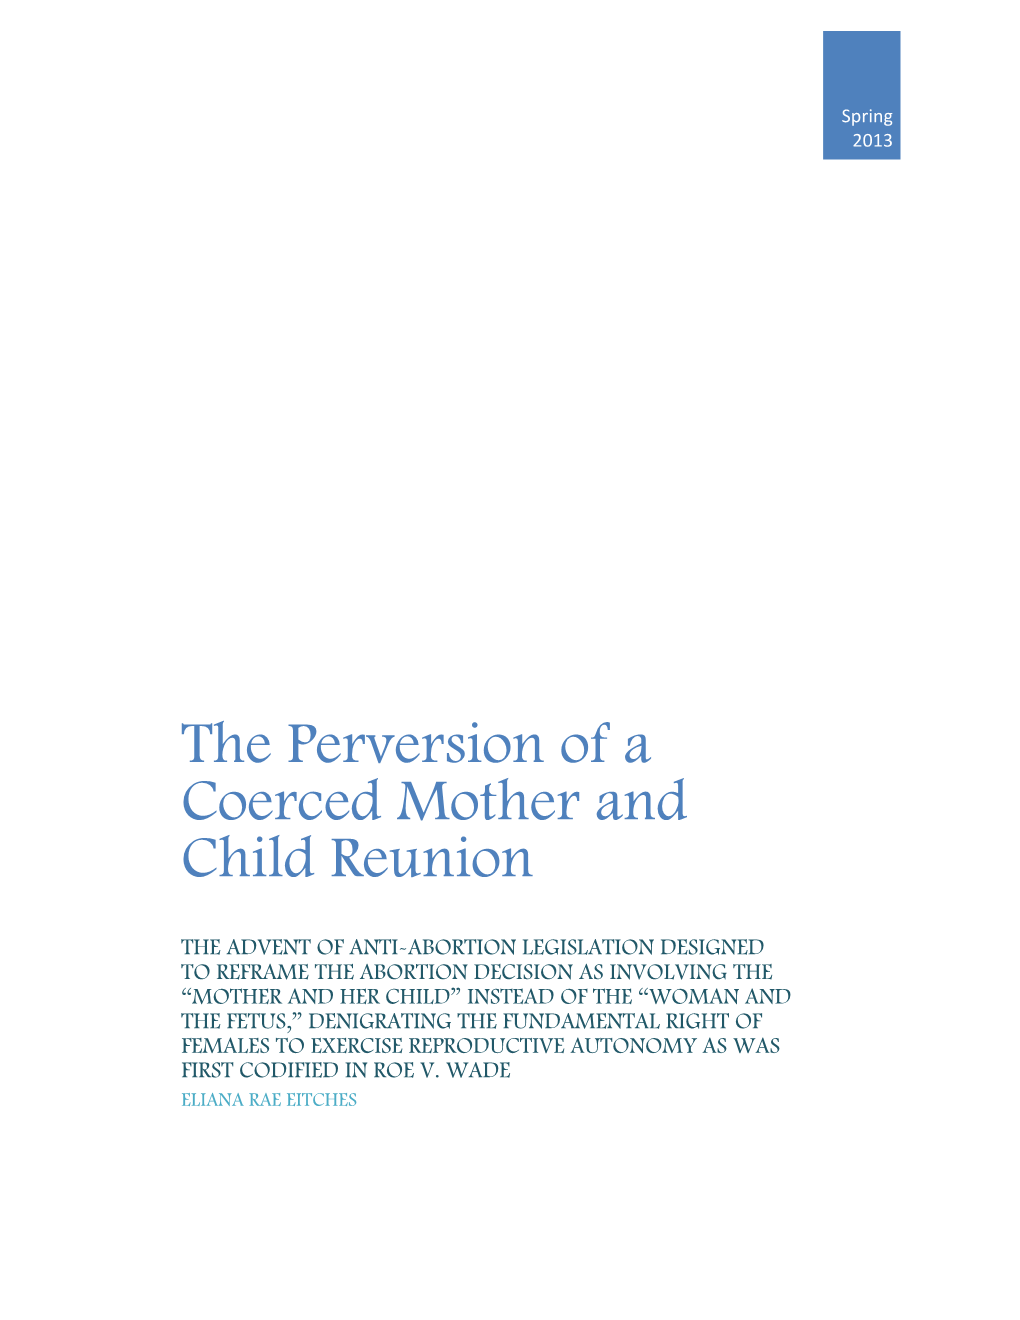 The Perversion of a Coerced Mother and Child Reunion